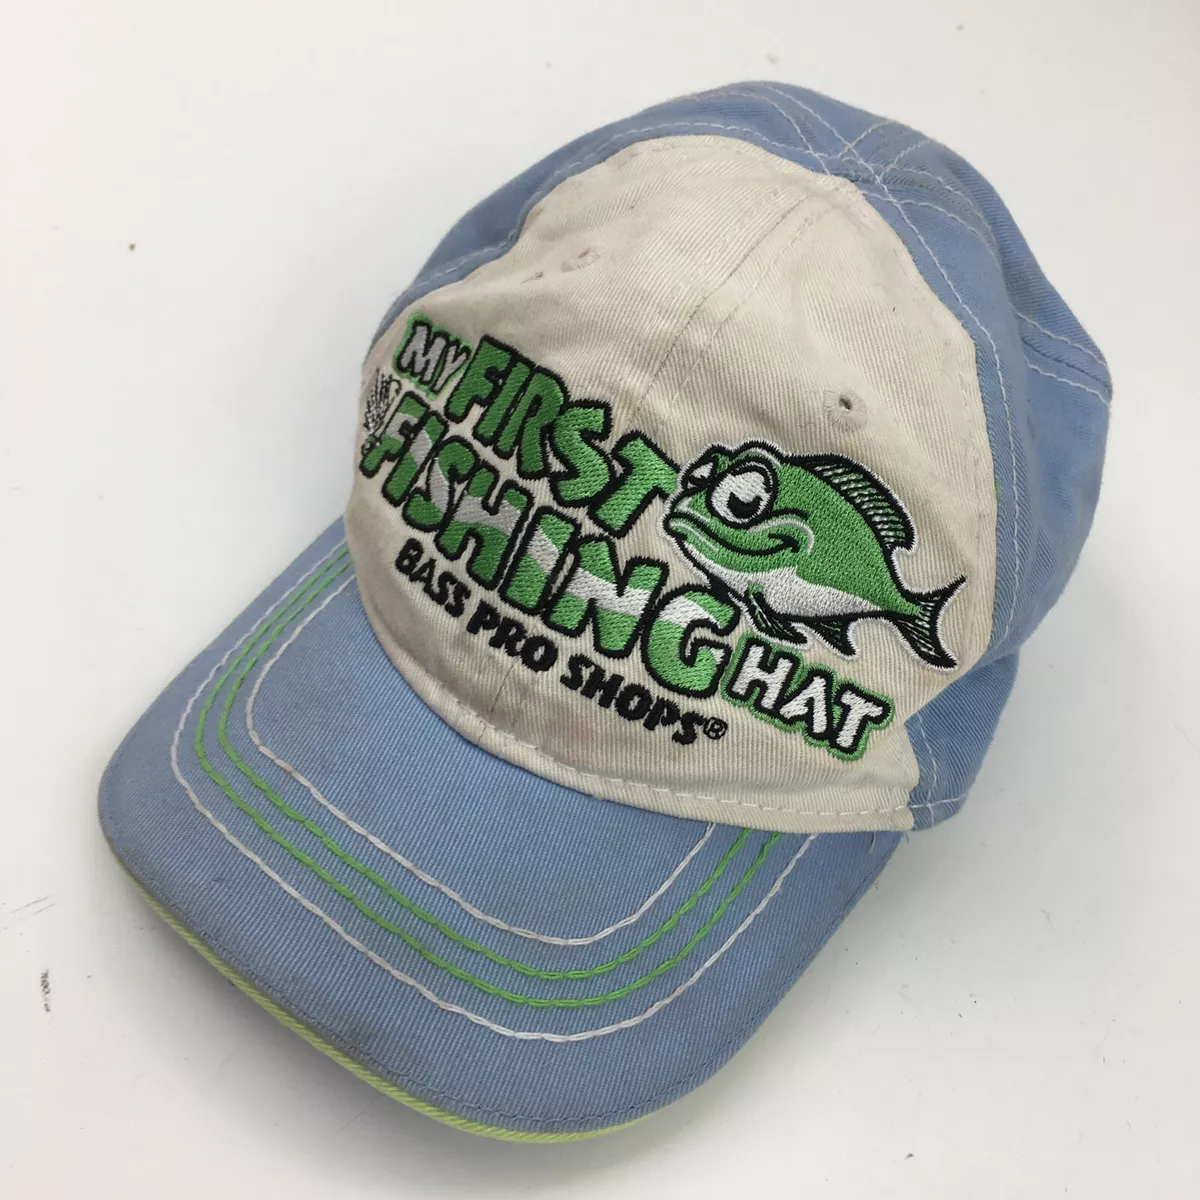 My first Fishing Hat Bass Pro Shops Toddlers Ball Cap Hat